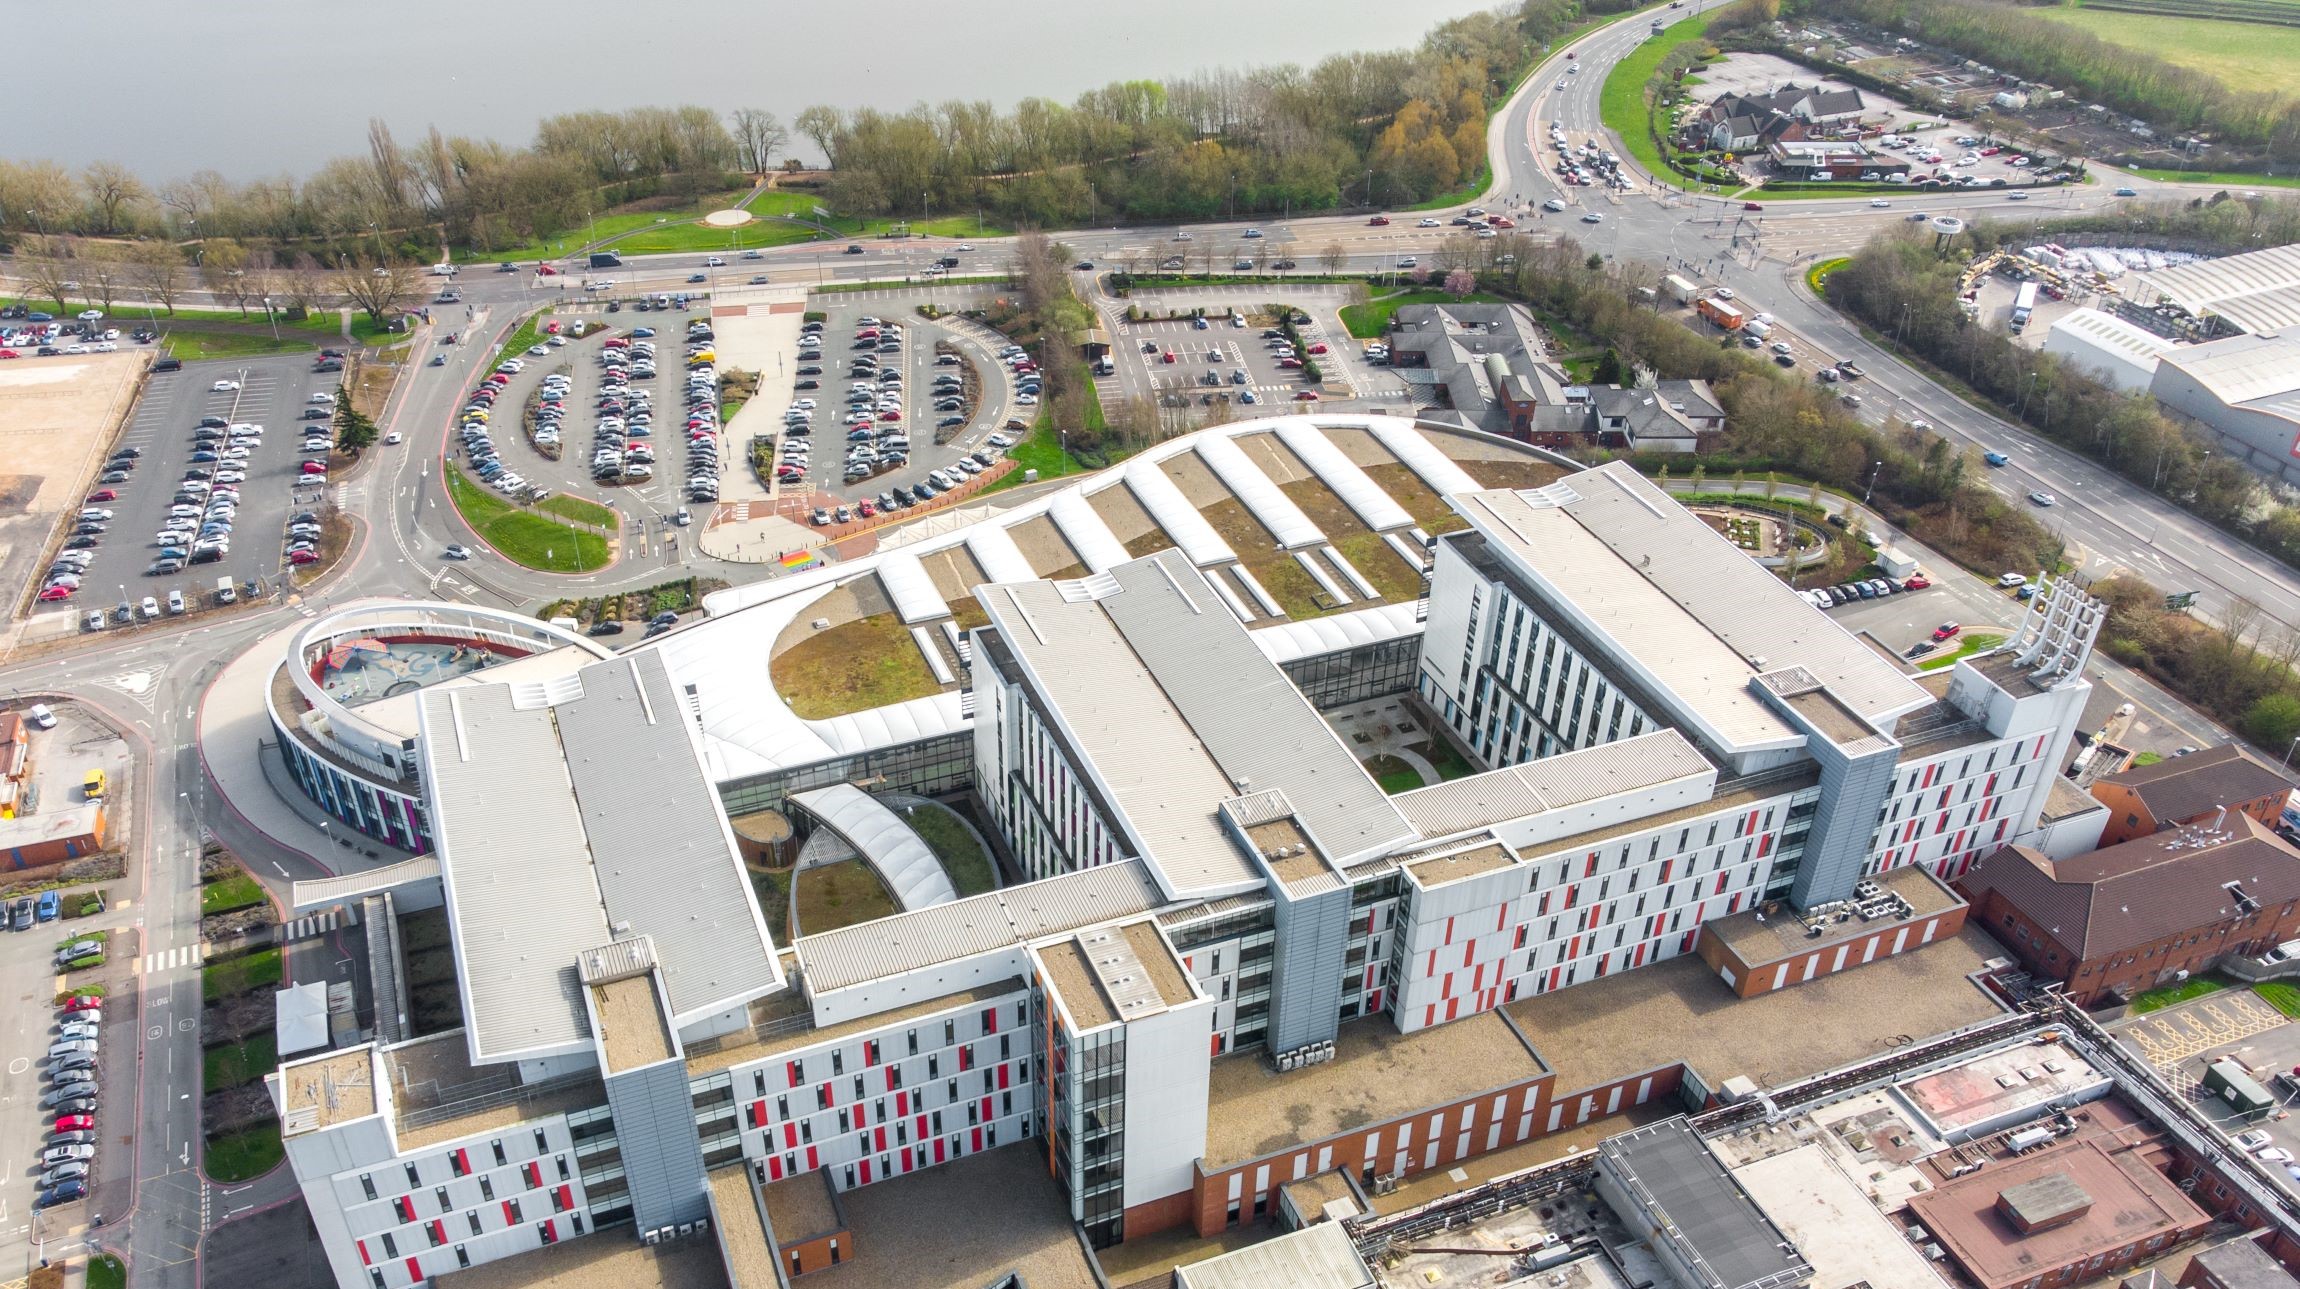 Aerial view of a multistorey hospital building and its car park which are located next to a lake.